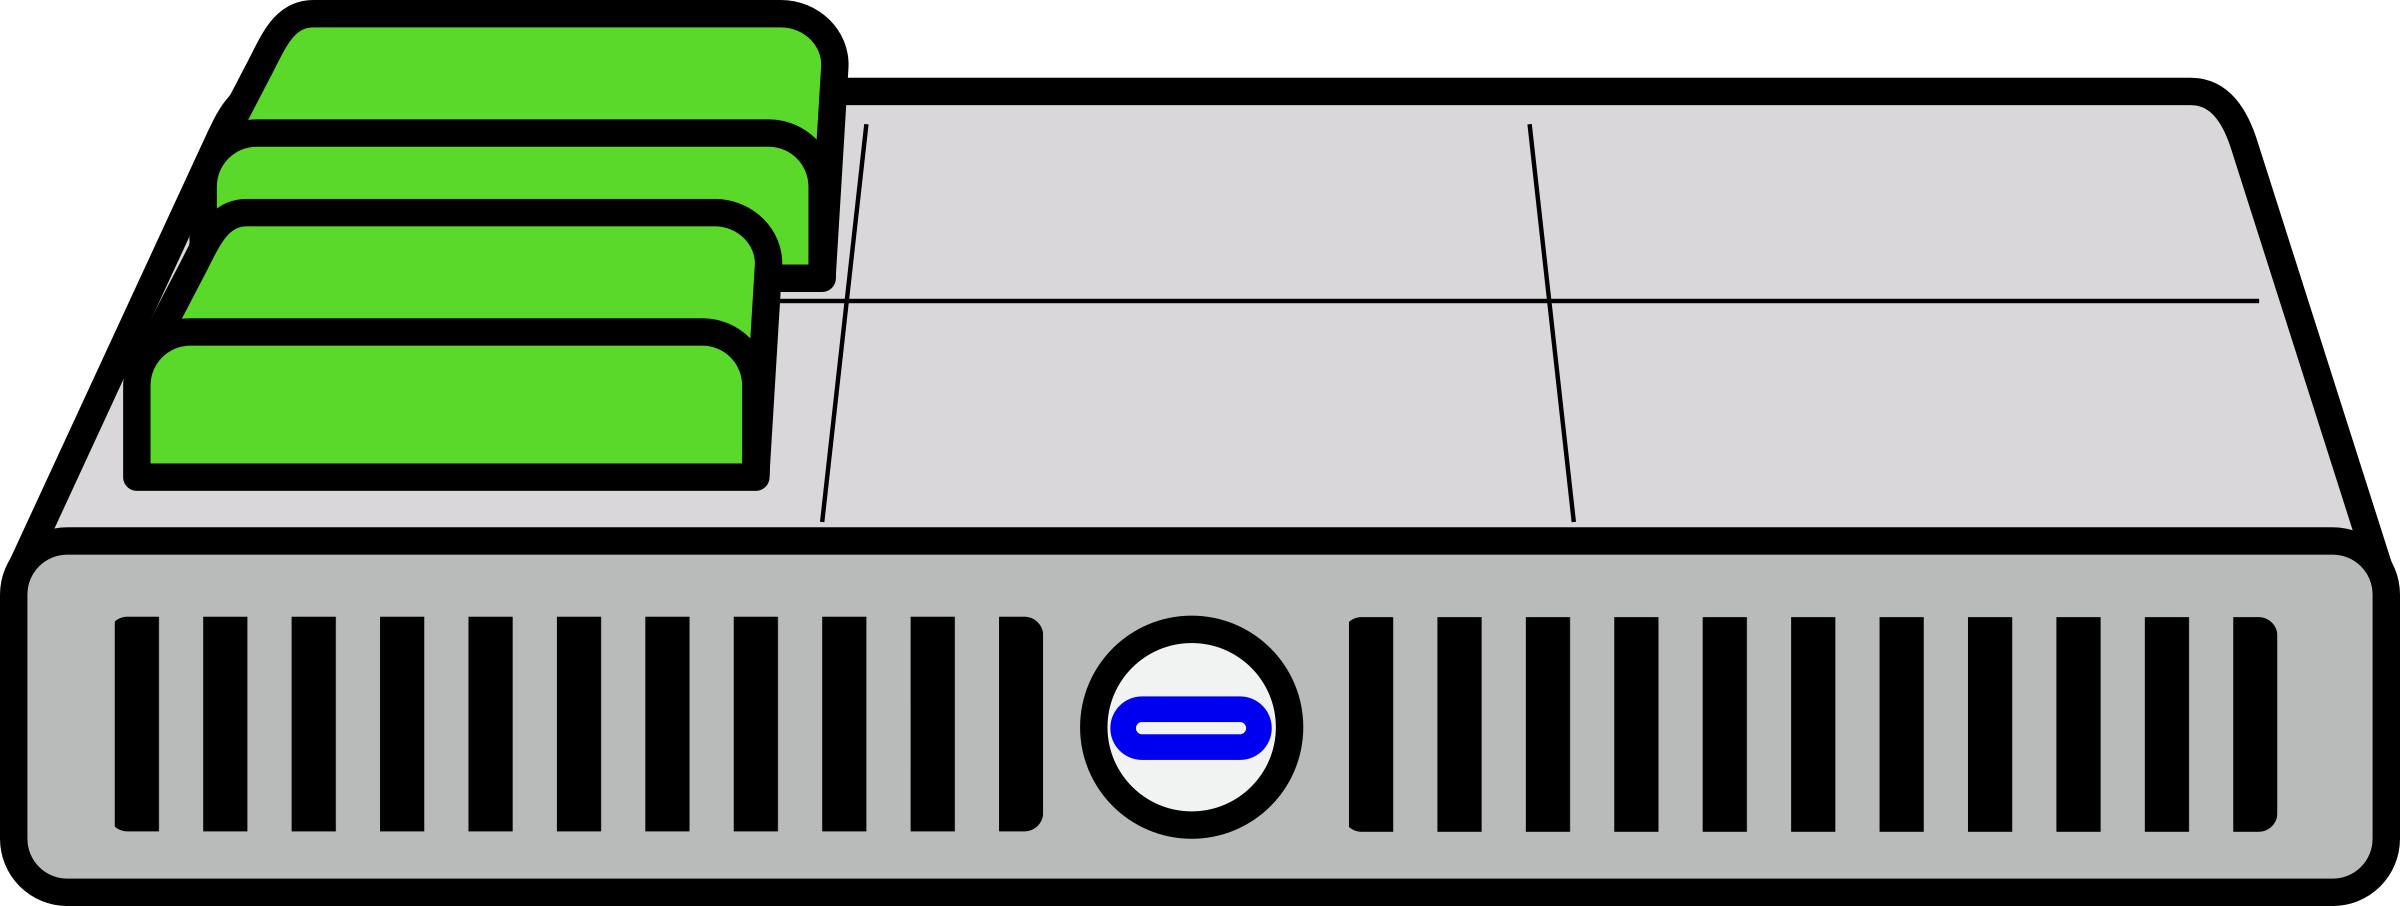 Two Virtual Machines png